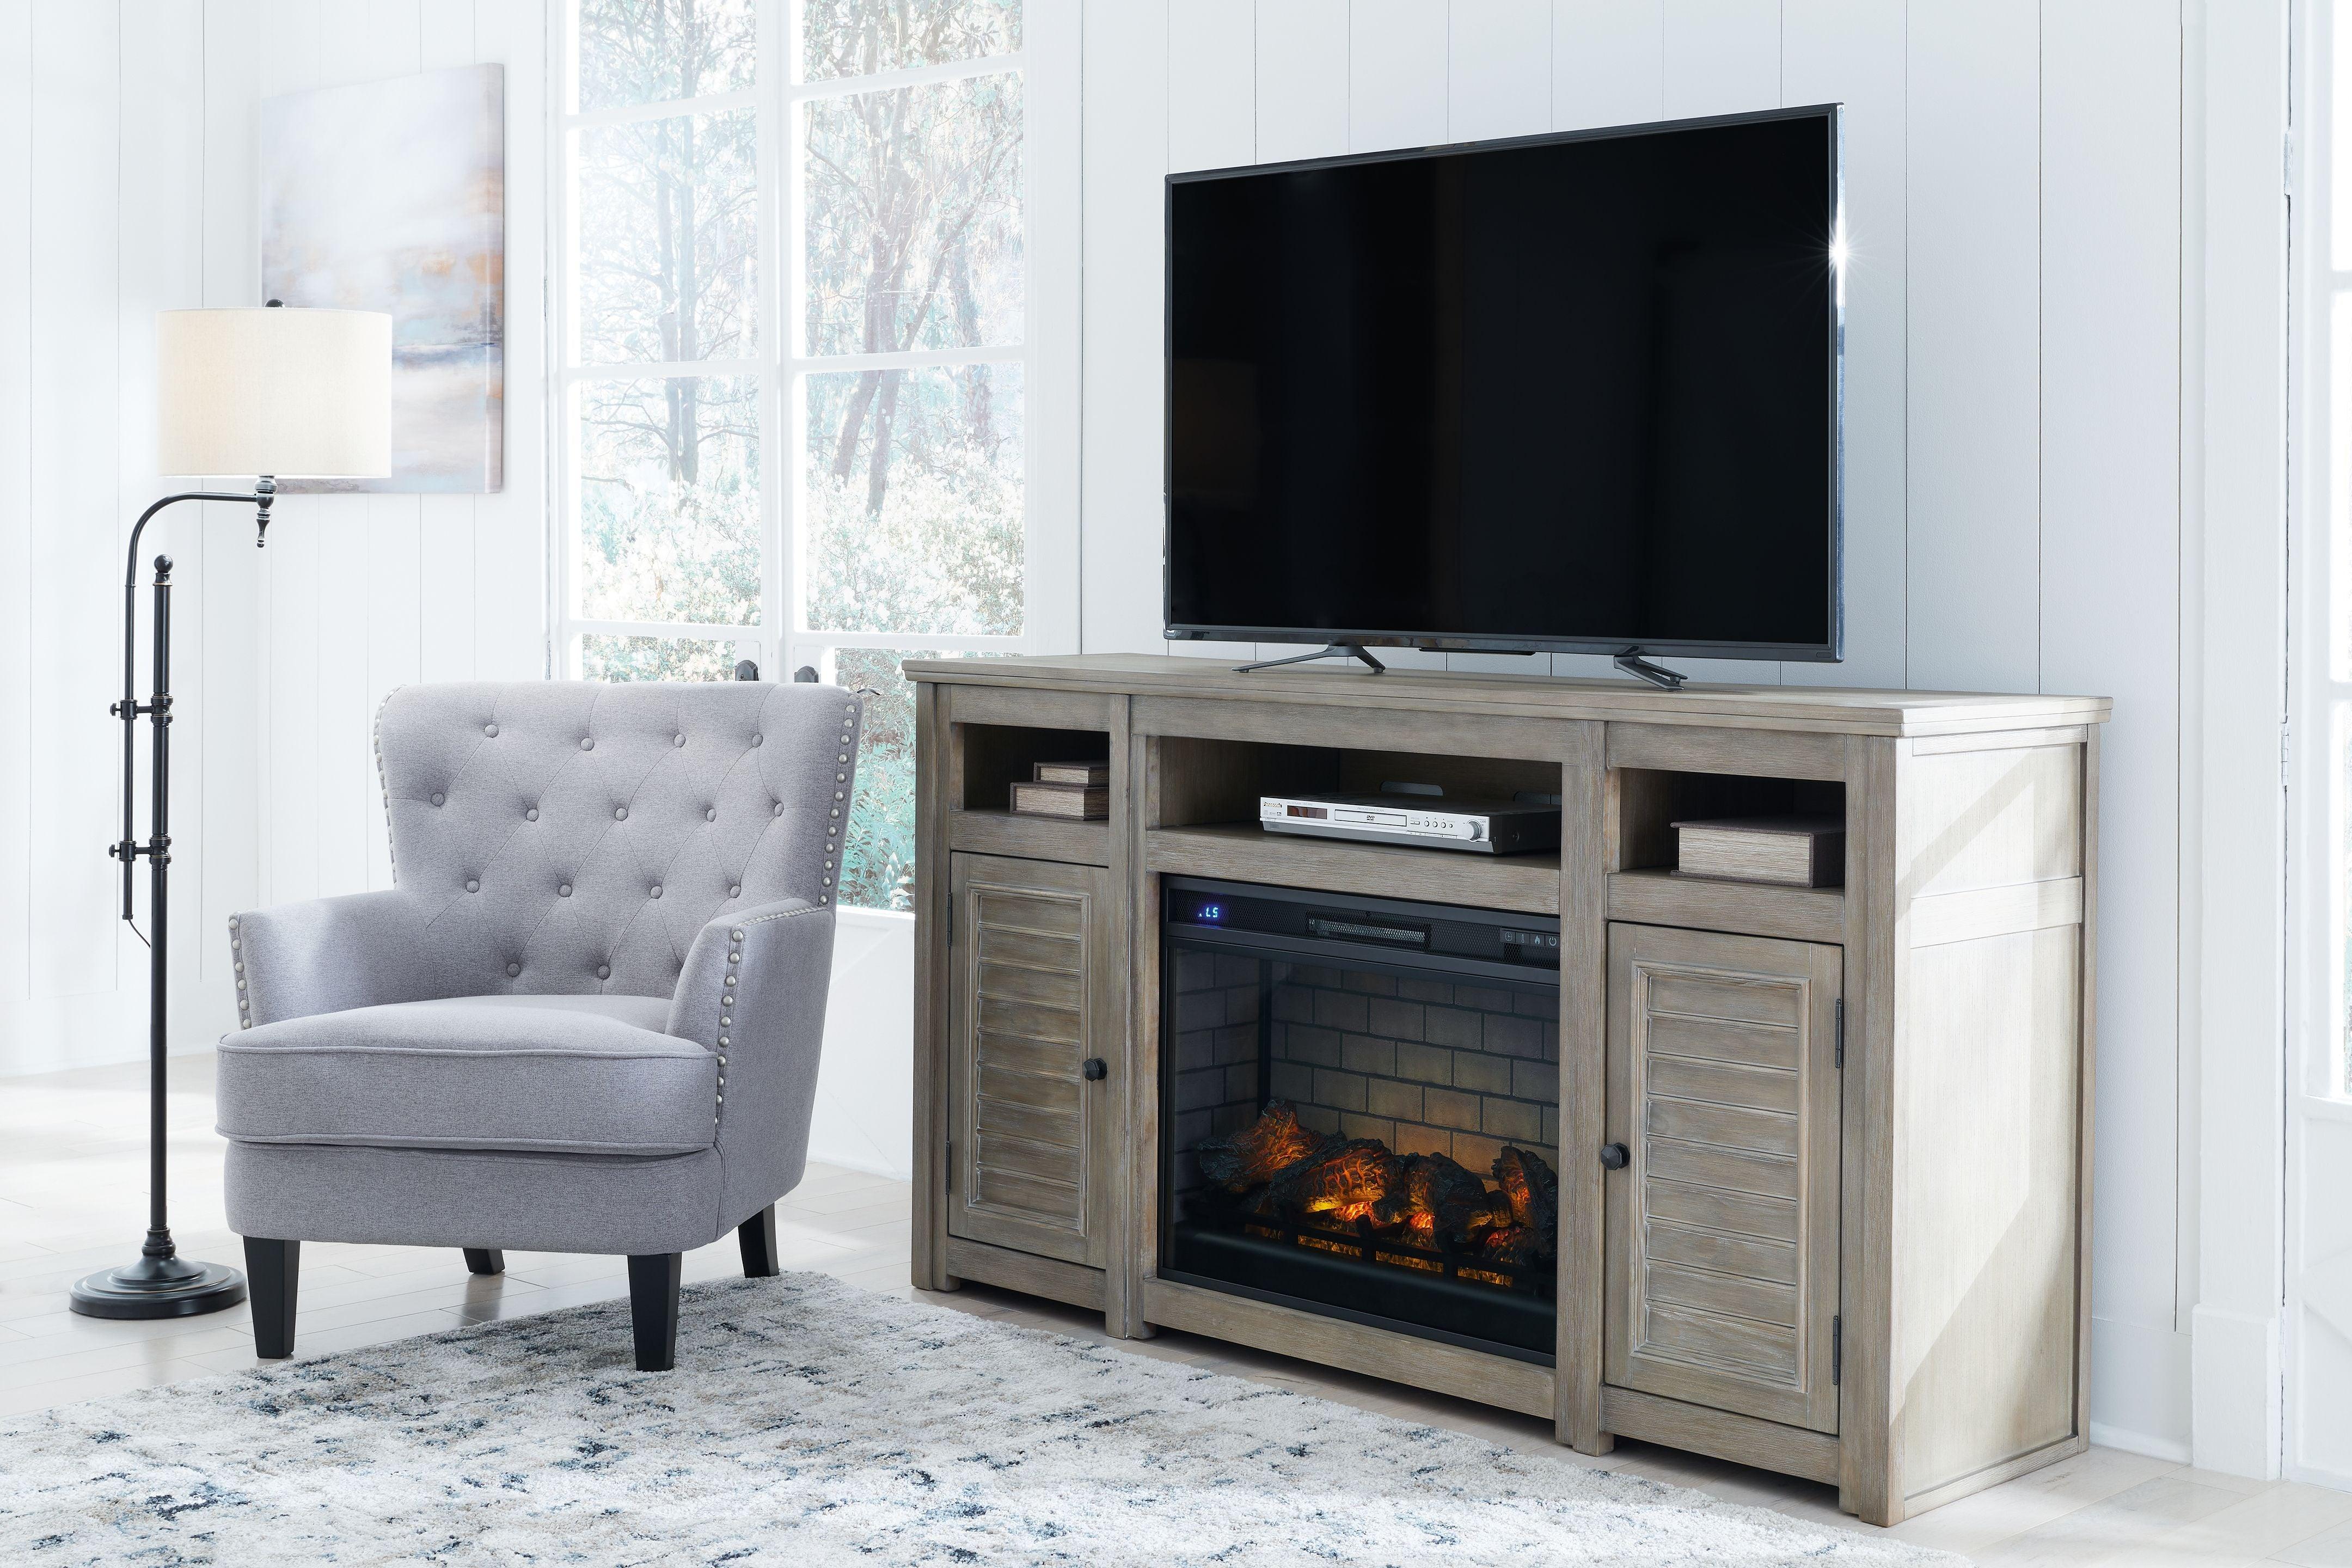 Signature Design by Ashley® - Moreshire - Bisque - 72" TV Stand With Electric Infrared Fireplace Insert - 5th Avenue Furniture